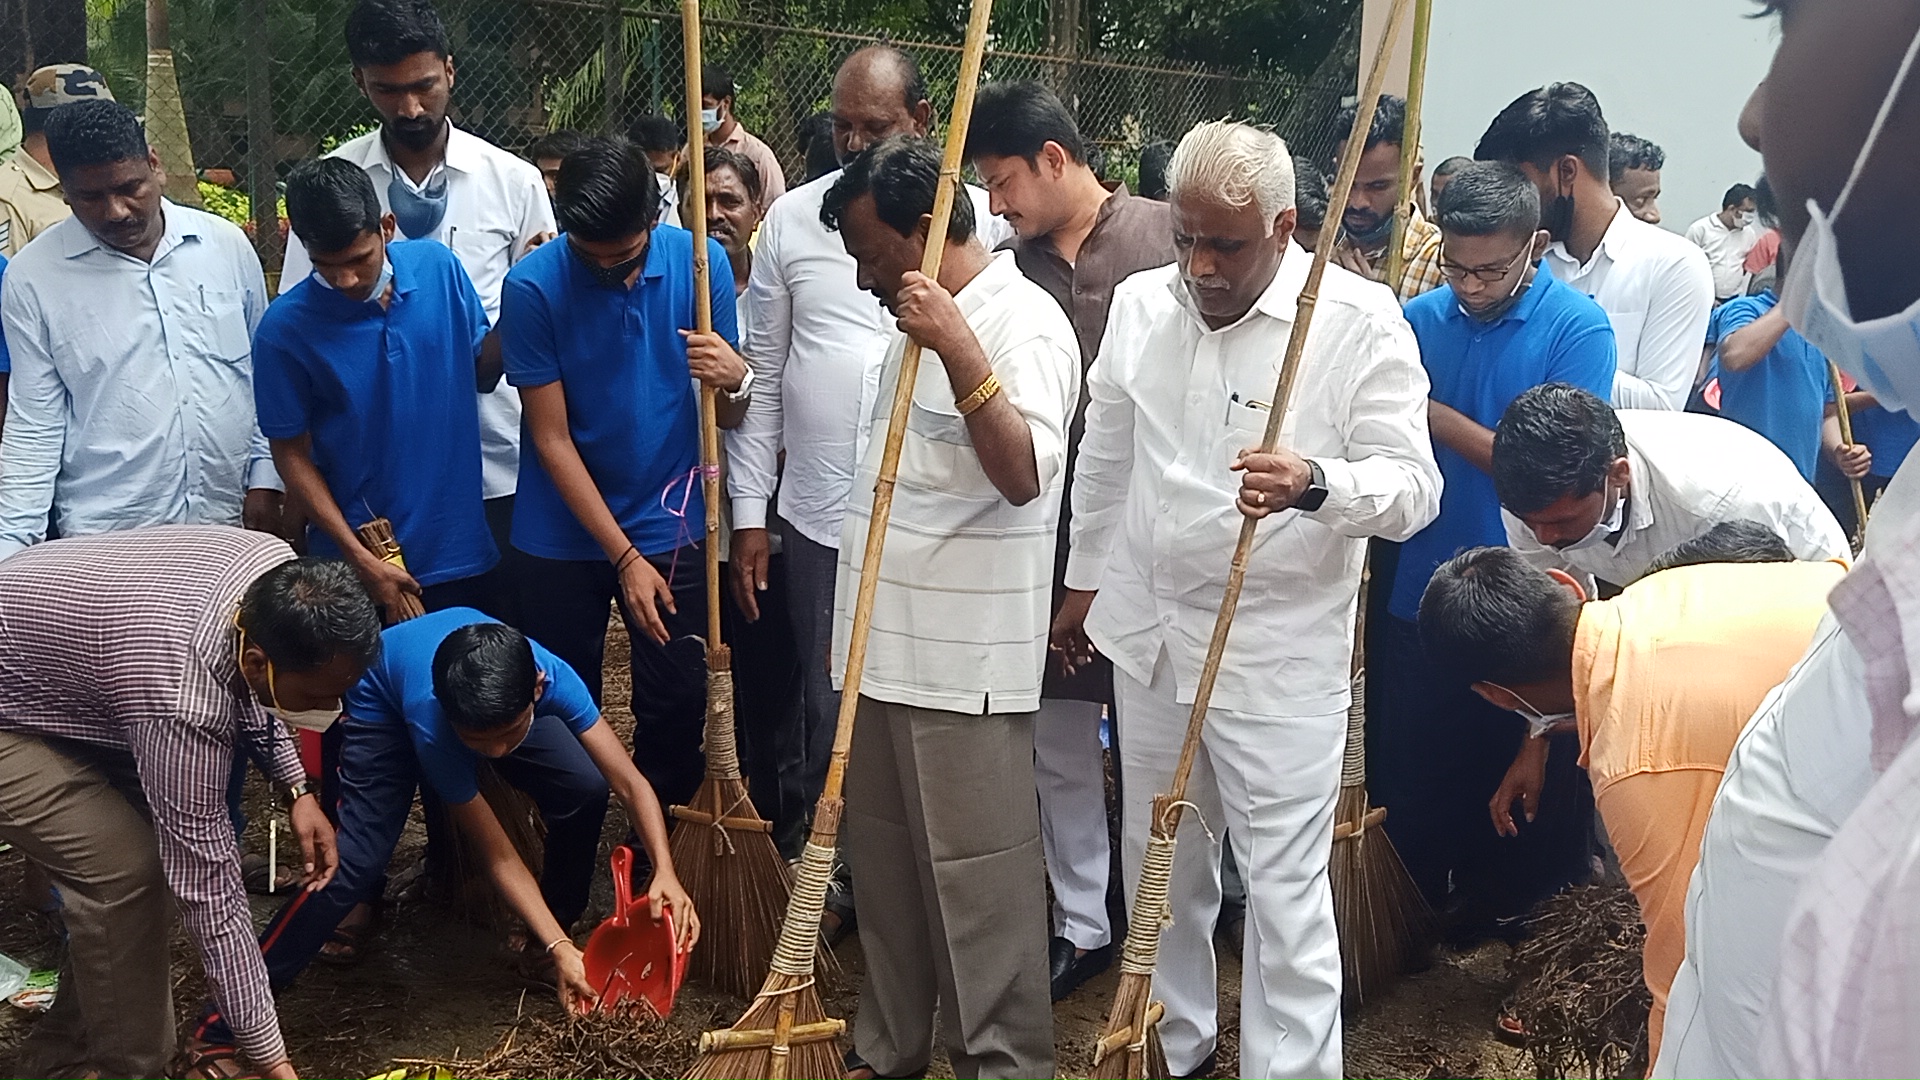 Minister Narayana swamy made cleaning work